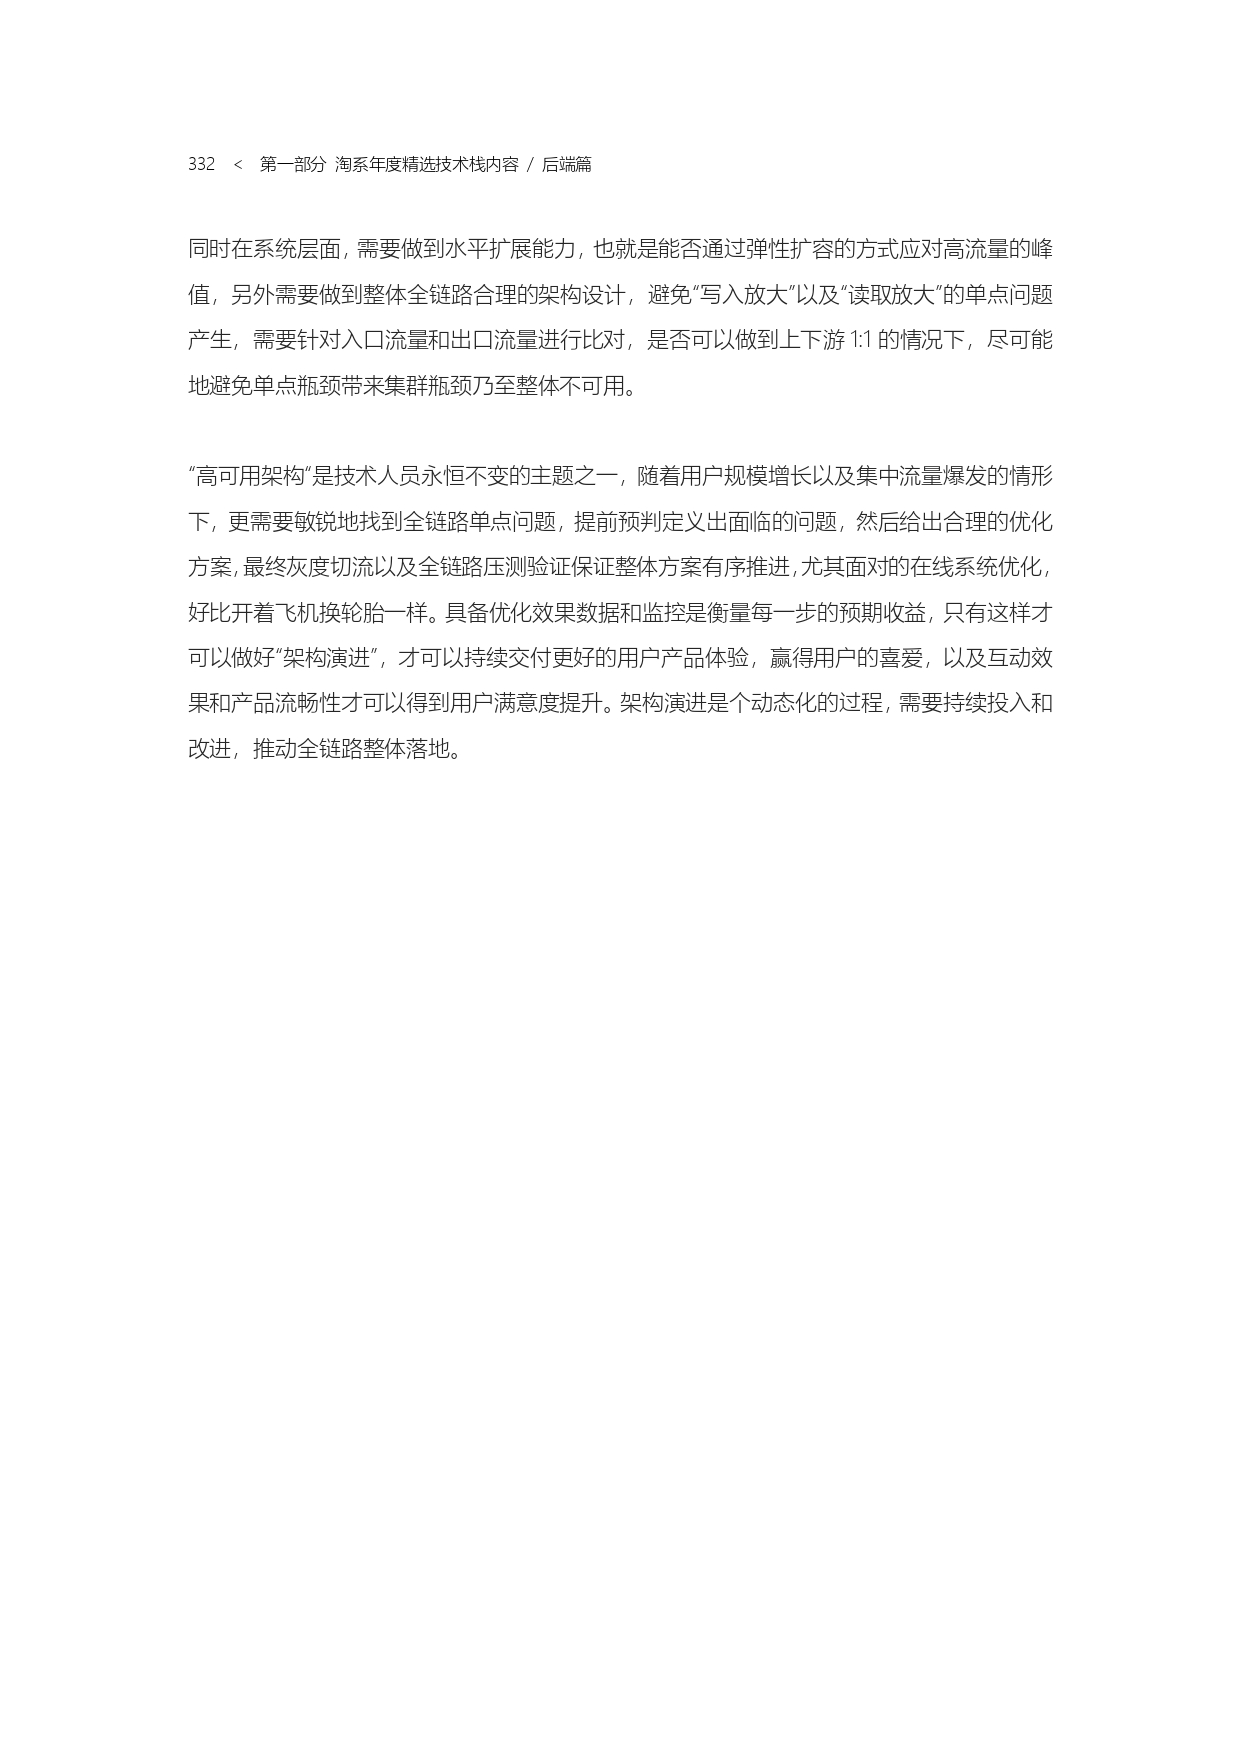 The Complete Works of Tao Technology 2020-1-570_page-0332.jpg